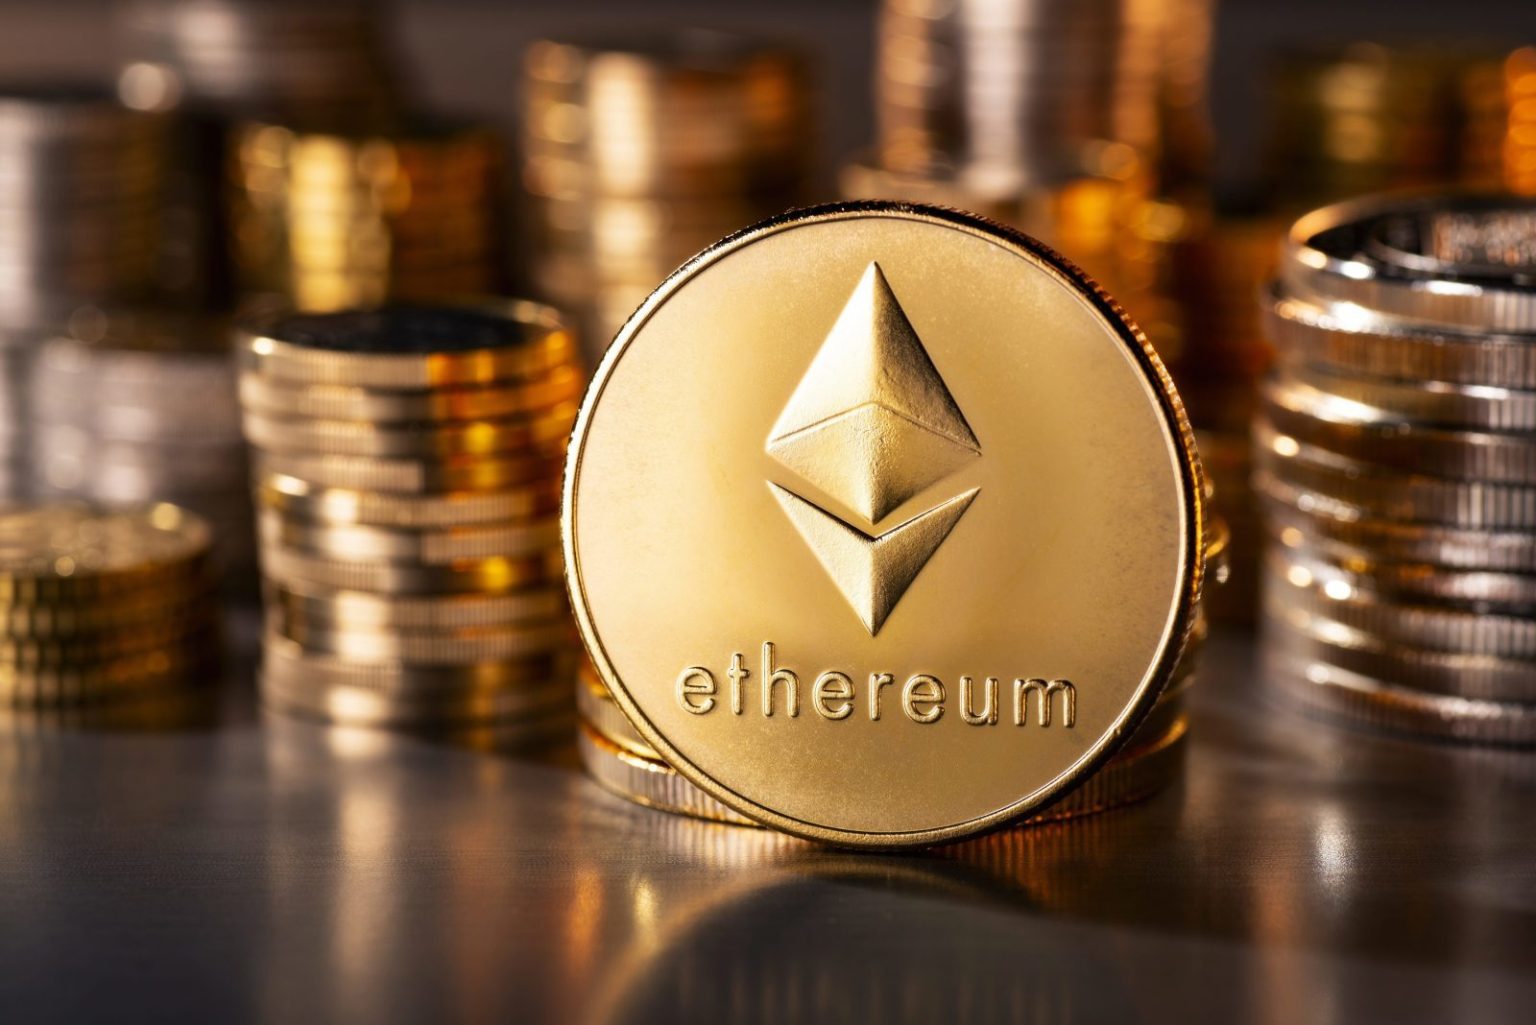 ethereum 2 0 staking contract now has 5 million eth